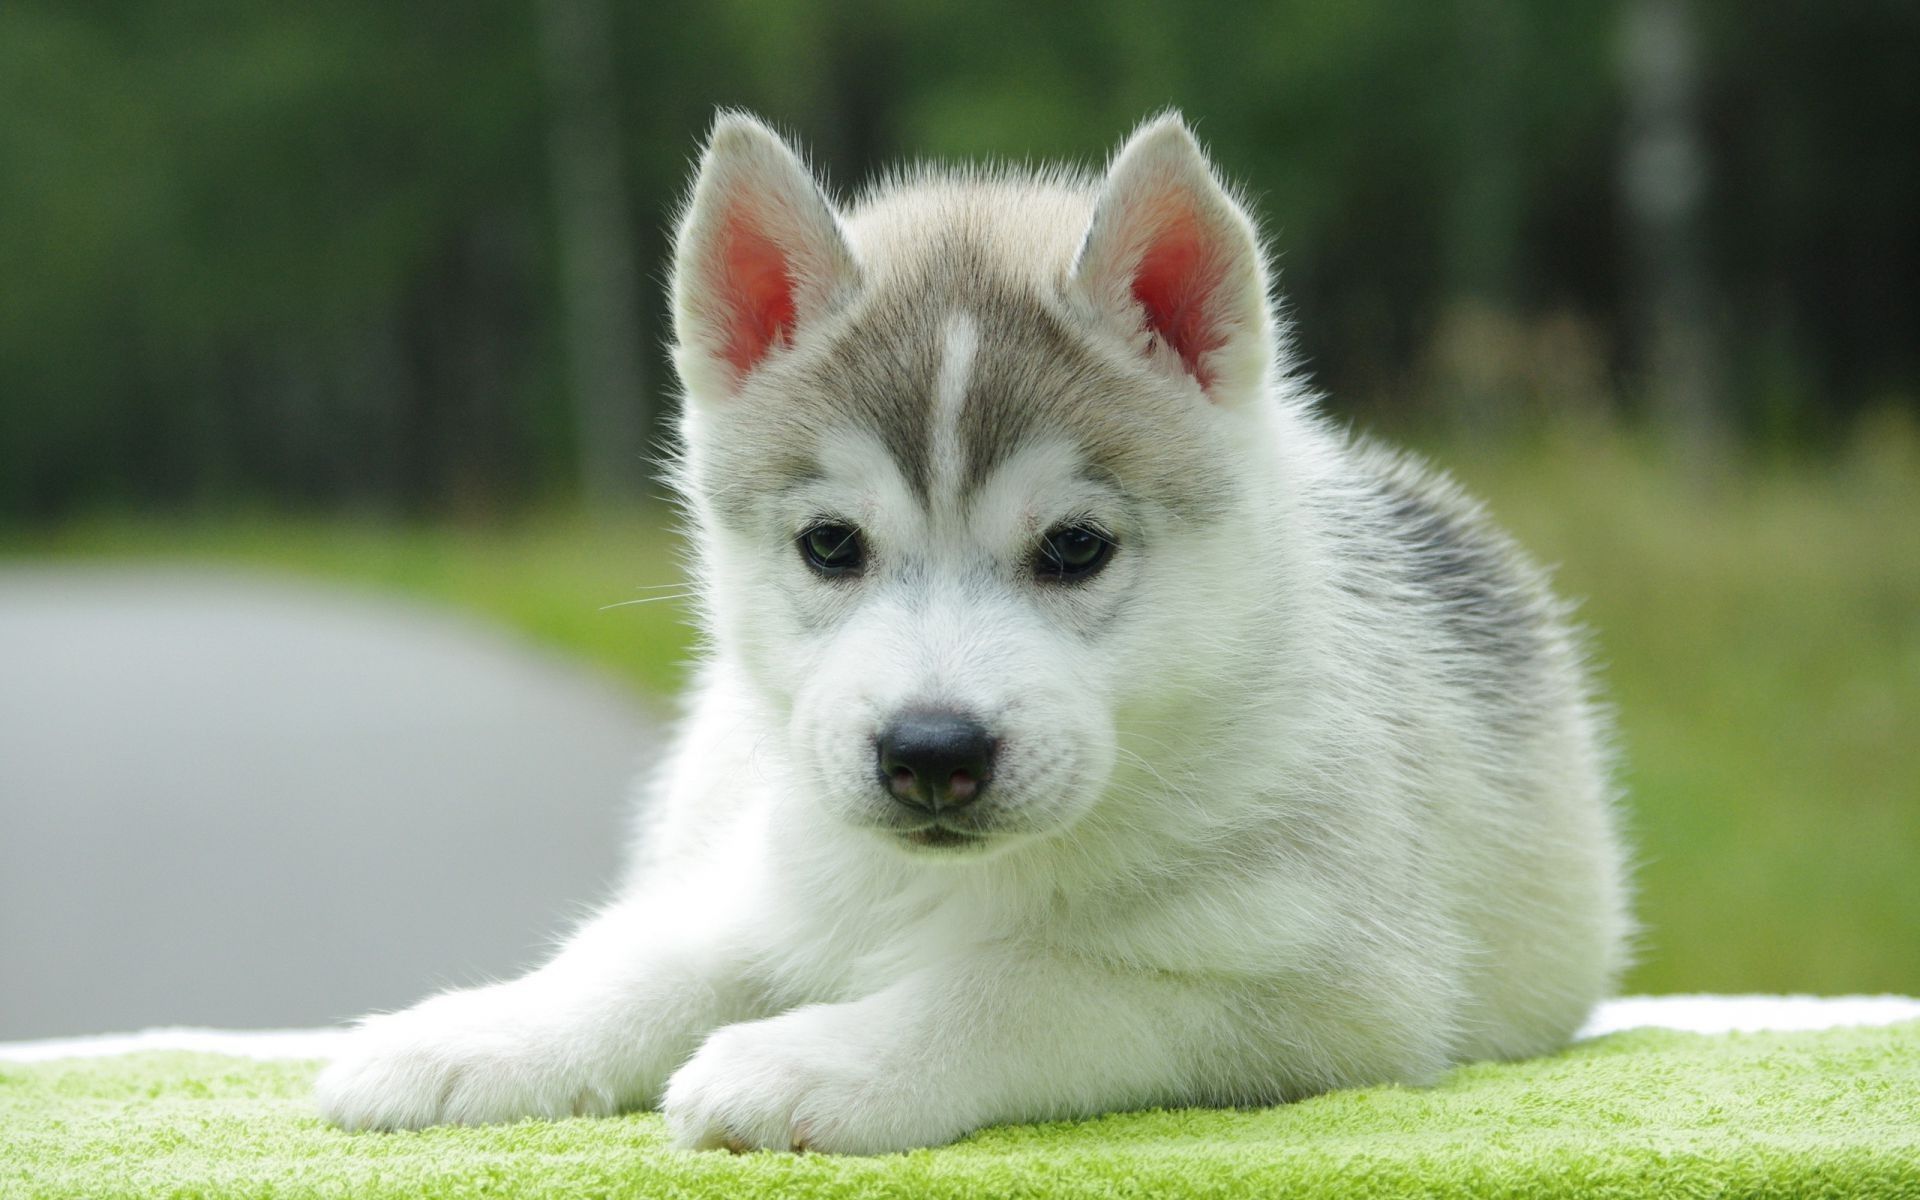 45 Cute Dog Wallpapers